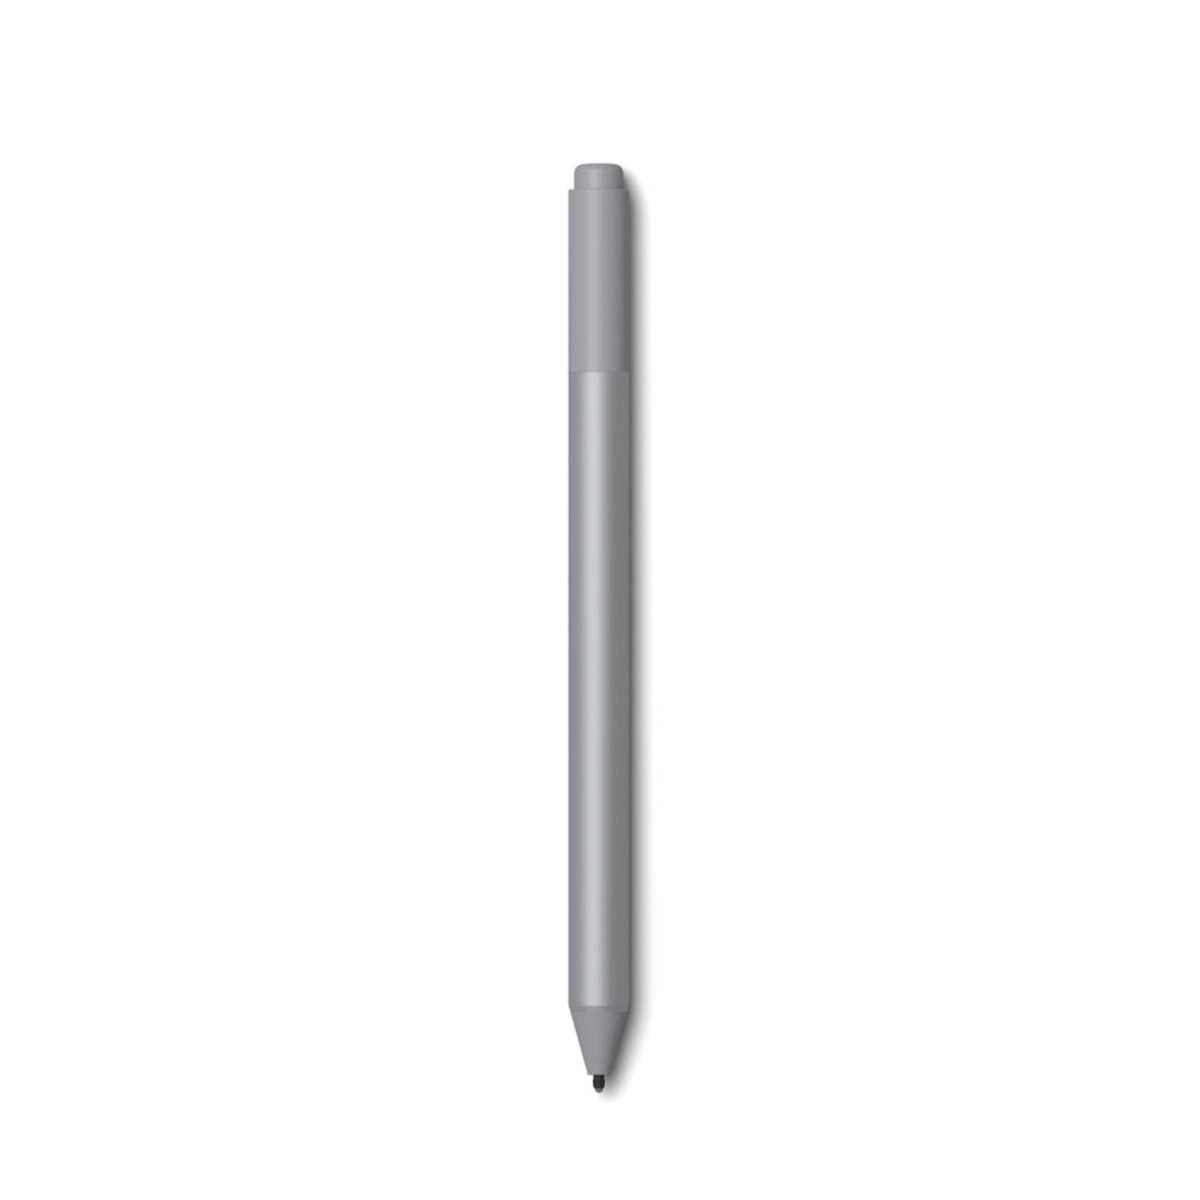 MICROSOFT Stylet pour Surface - Platine - Compatible Surface Go